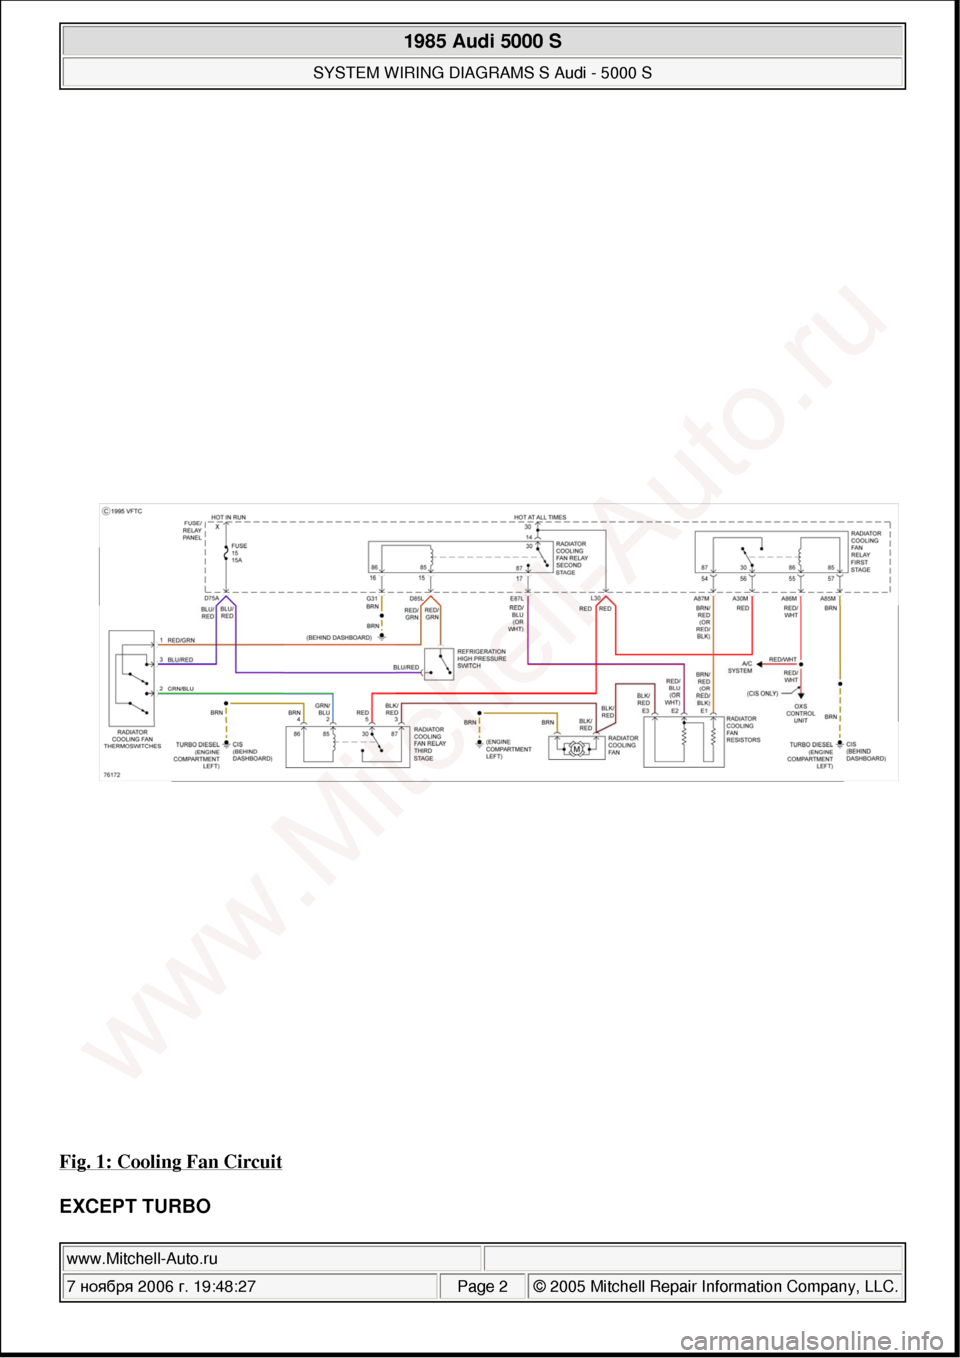 AUDI 5000S 1985 C2 System Wiring Diagram 
Fig. 1: Cooling Fan Circuit 
EXCEPT TURBO 
 
1985 Audi 5000 S 
SYSTEM WIRING DIAGRAMS S Audi - 5000 S  
www.Mitchell-Auto.ru  
7  ноября  2006 г. 19:48:27Page 2 © 2005 Mitchell Repair Informa